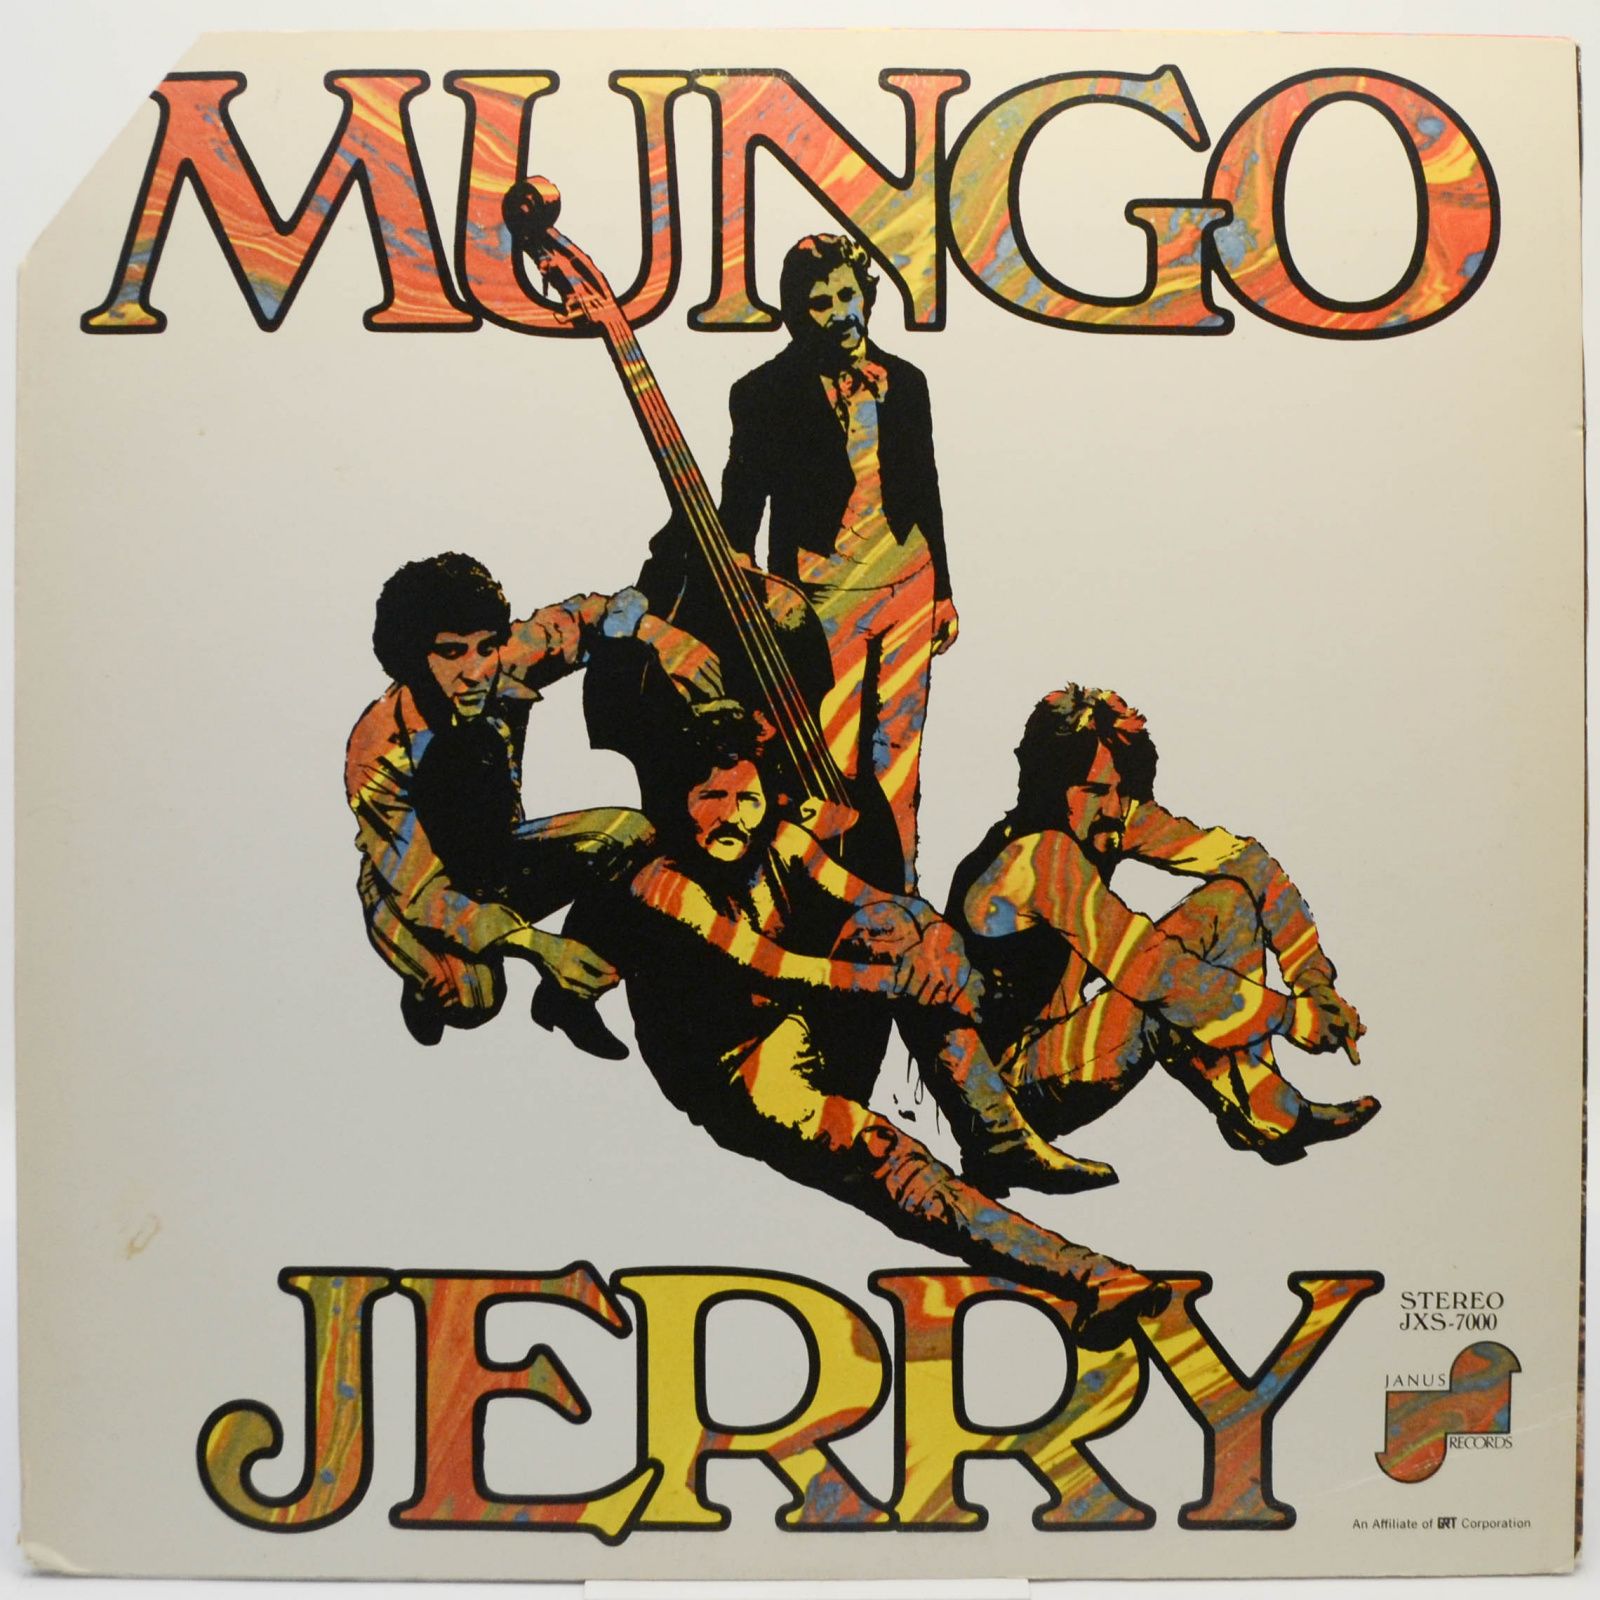 Mungo jerry in the summertime. Mungo Jerry 1970. Mungo Jerry 1970 - обложка CD. Mungo Jerry in the Summertime 1970.